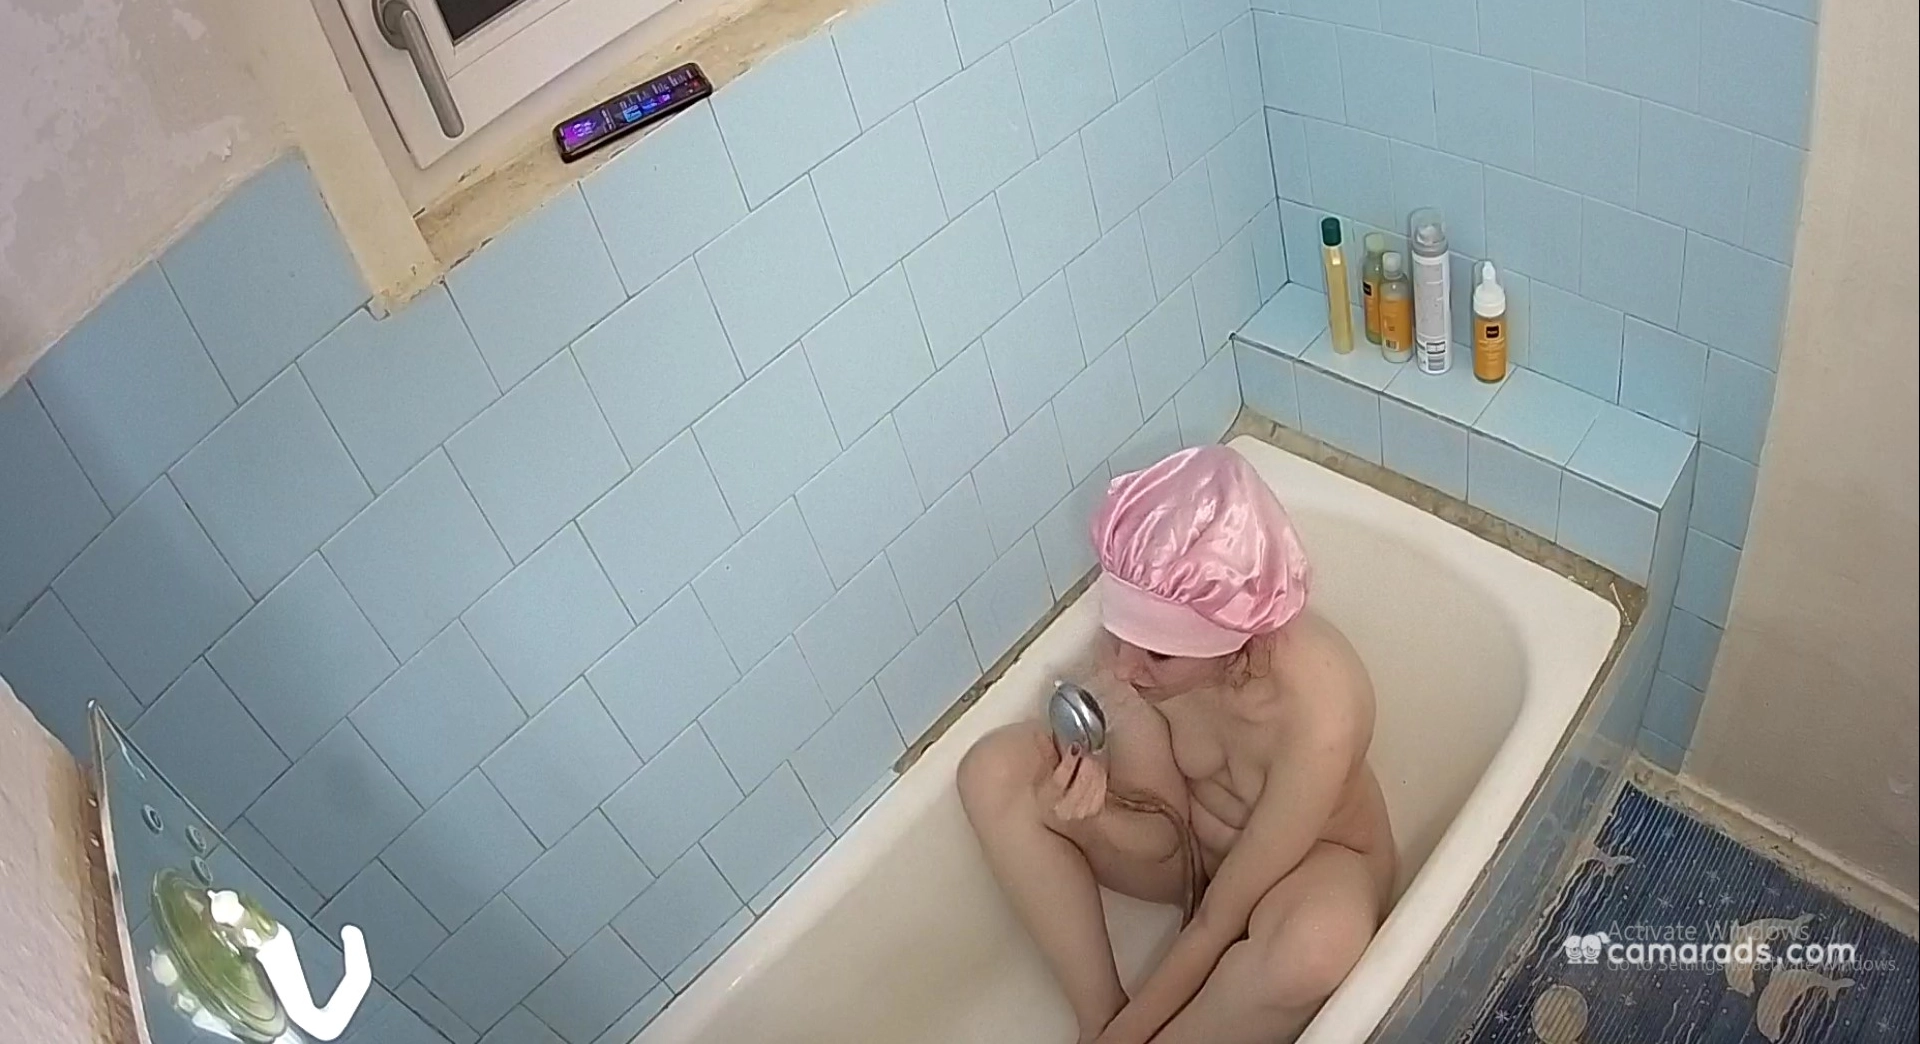 Amy is naked in bathroom